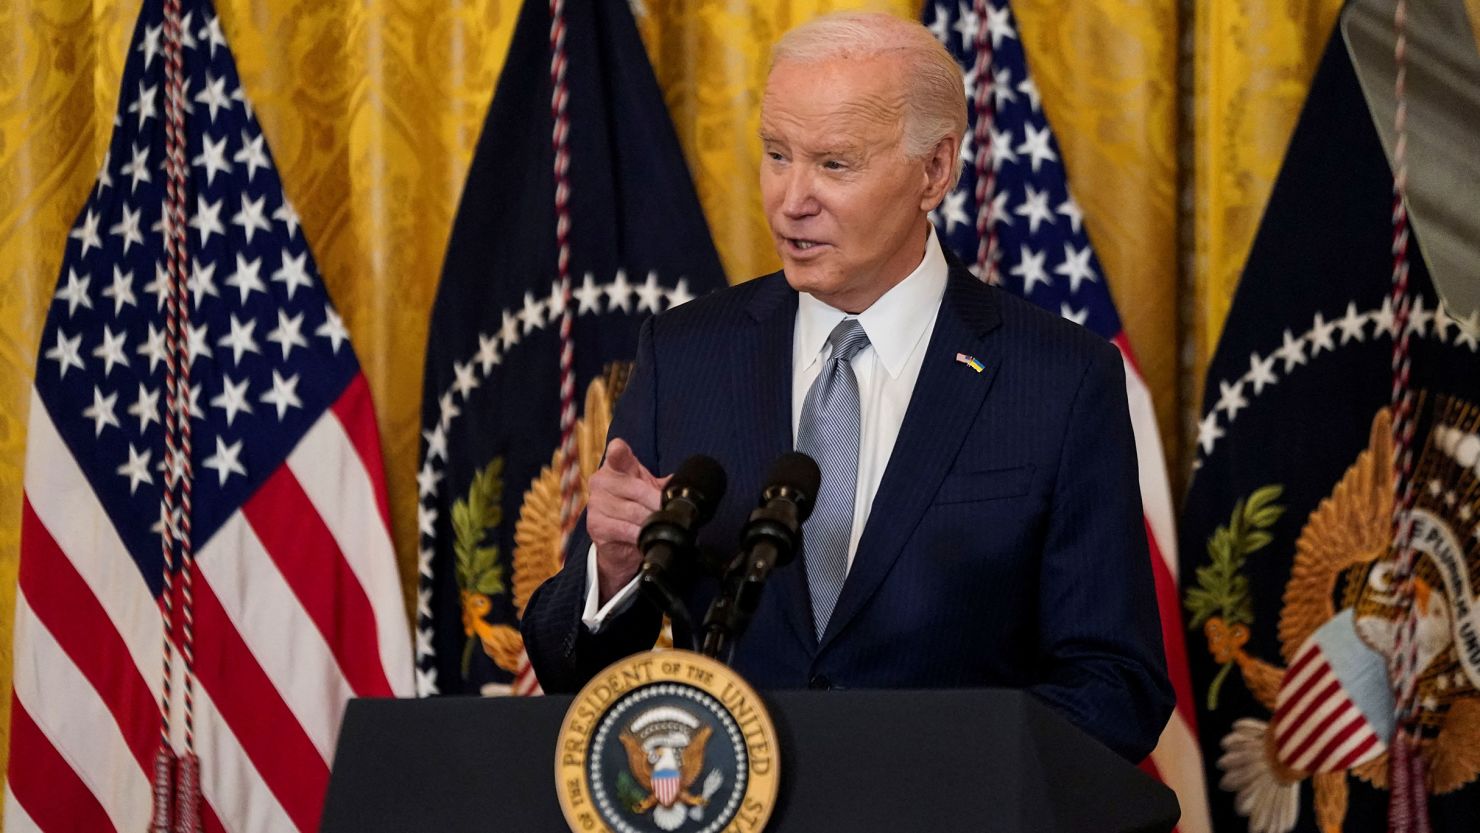 President Joe Biden delivers remarks to US governors attending the National Governors Association winter meeting in the East Room of the White House in Washington, DC, on February 23.